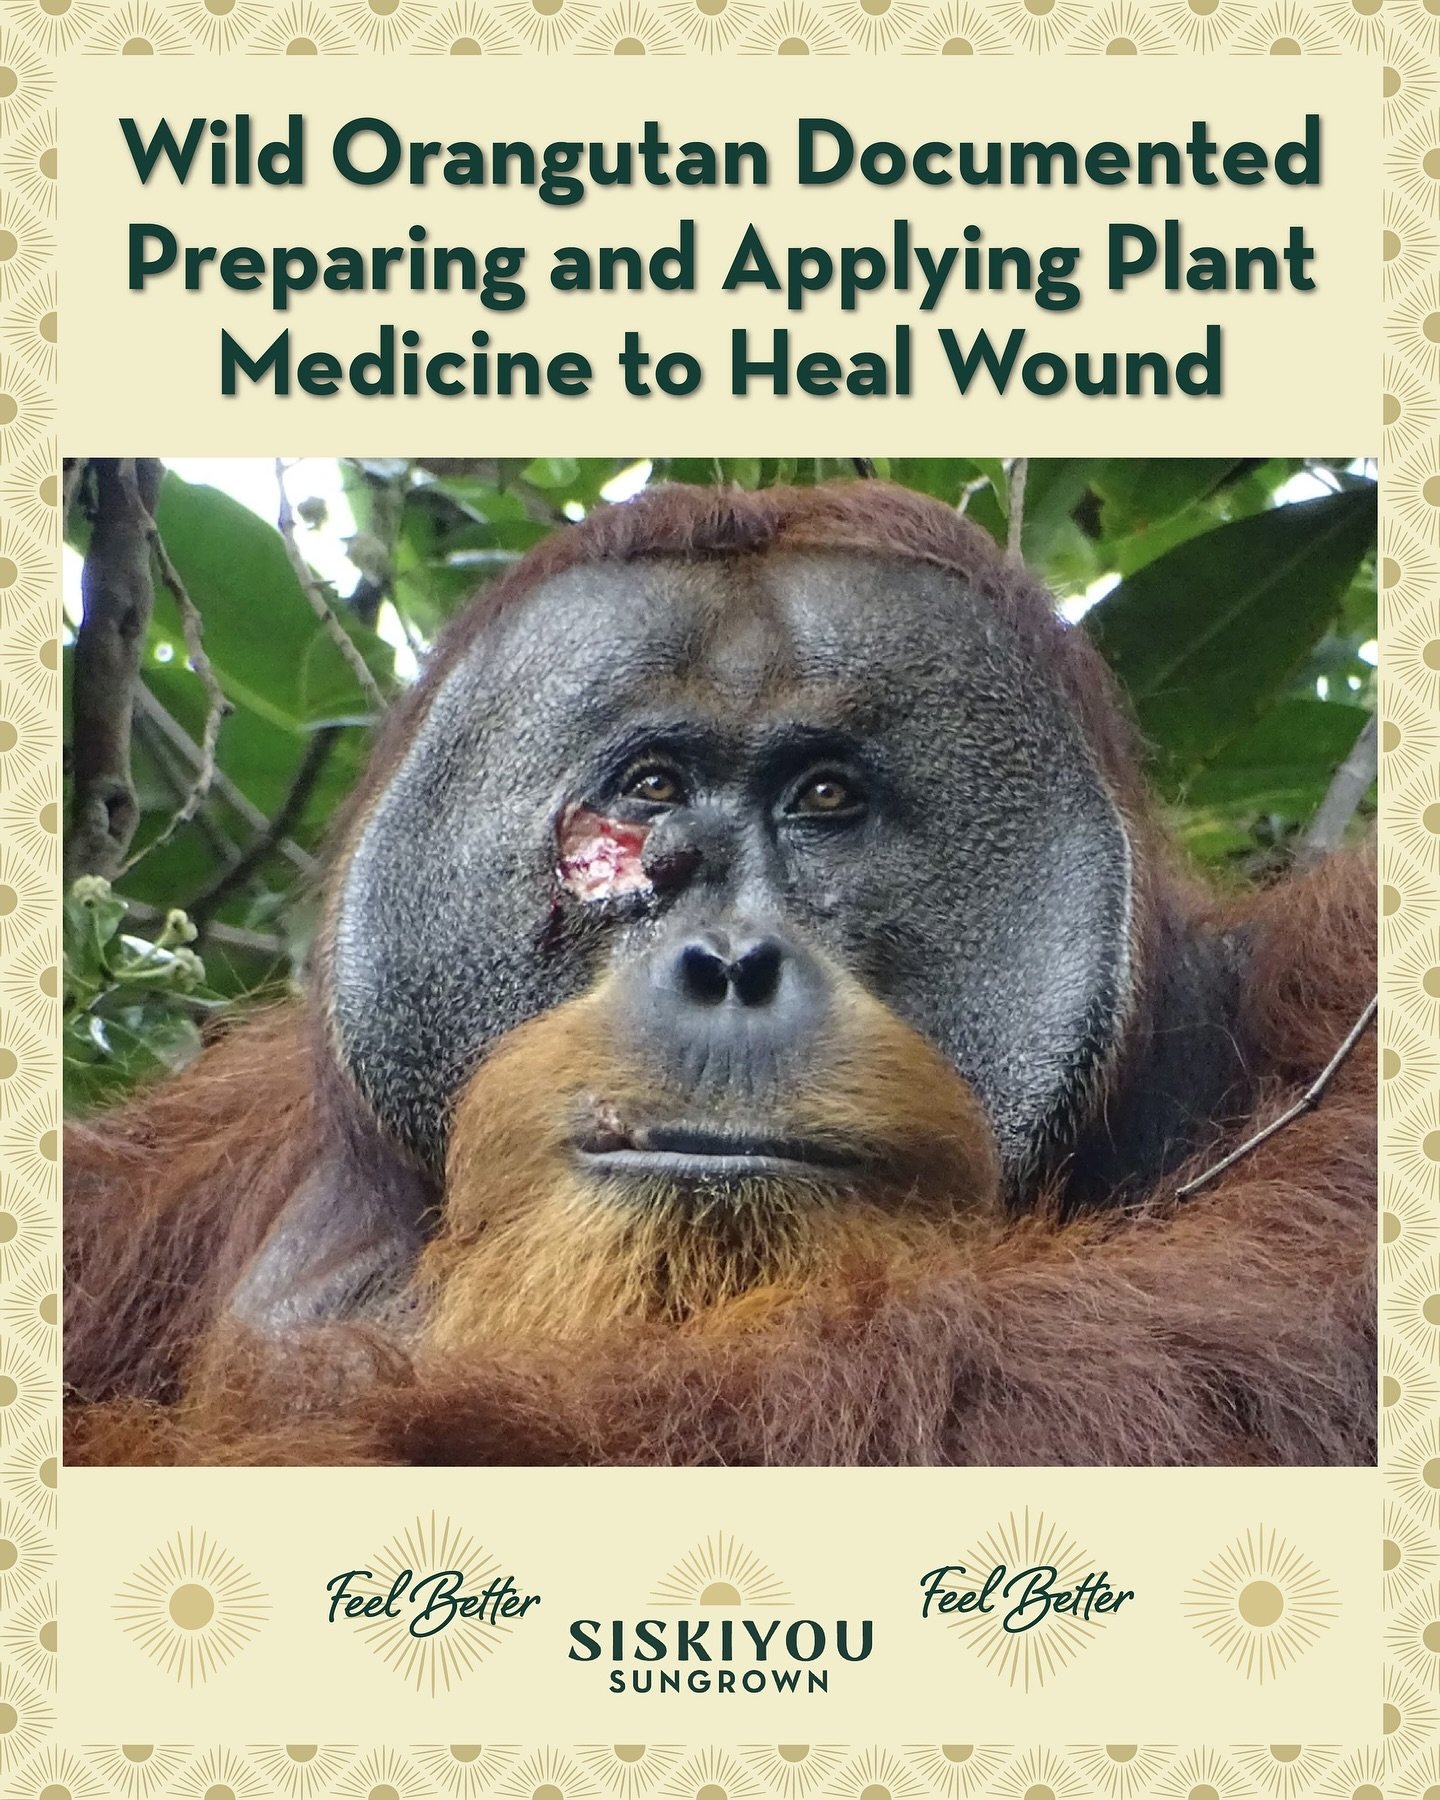 A 32 year old orangutan in Indonesia was documented in the first known case of active wound treatment with a medicinal plant by a non-human animal in the wild. Researchers observed him repeatedly dabbing chewed leaves of a liana vine onto a fresh fac